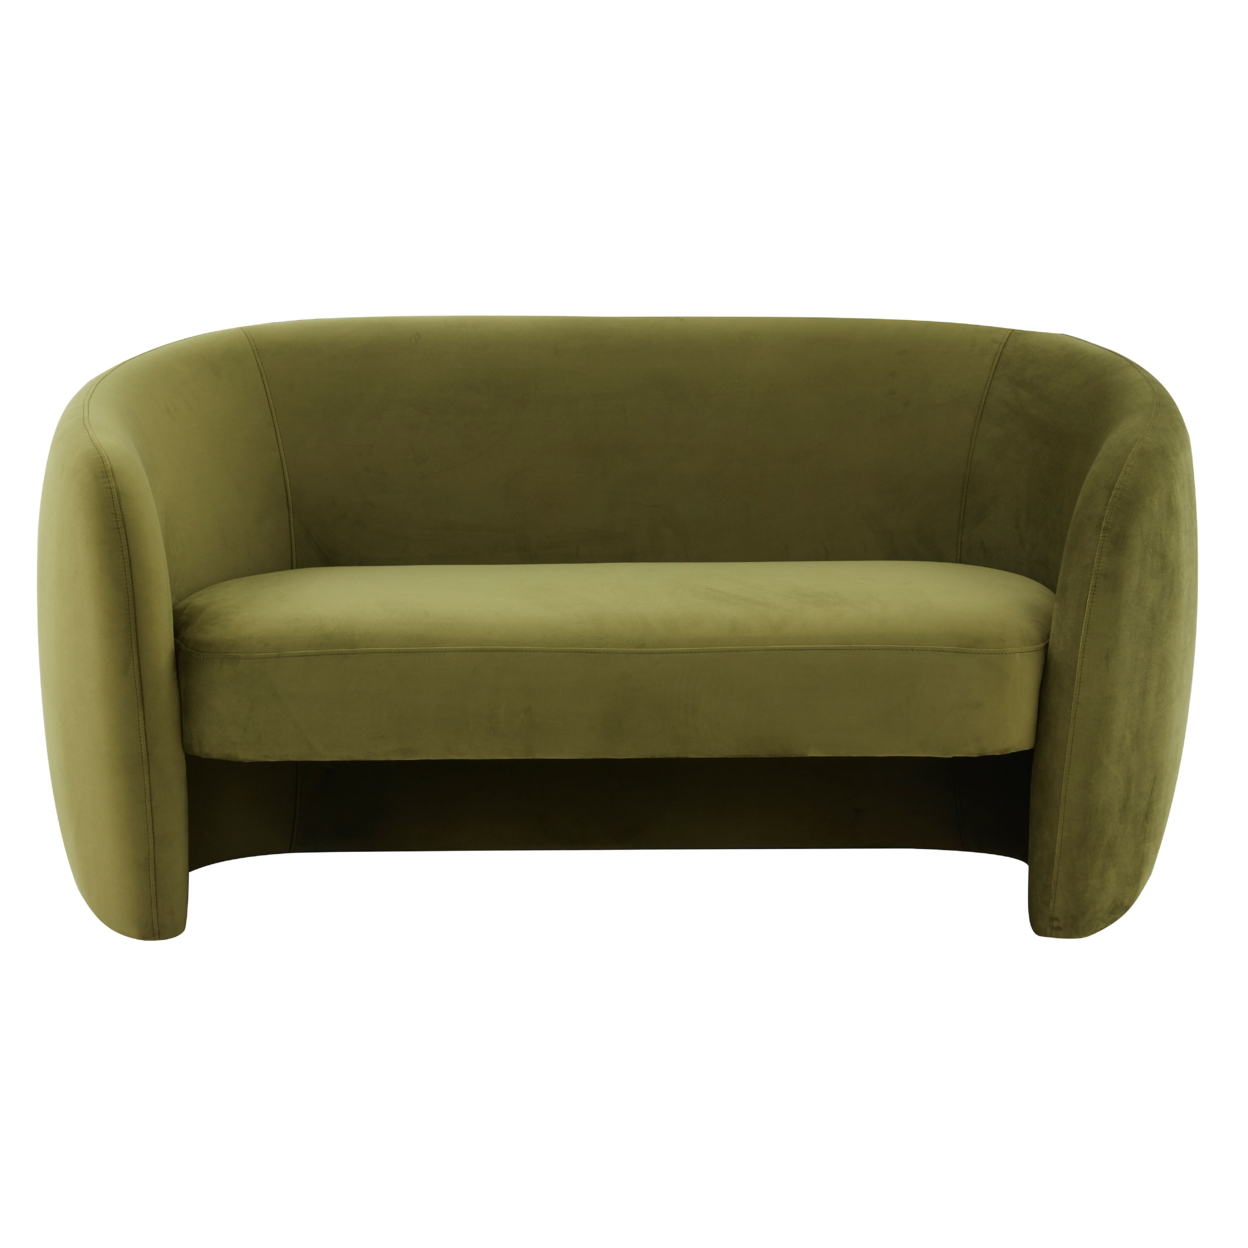 SAFAVIEH COUTURE Zhao Curved Loveseat Olive Green